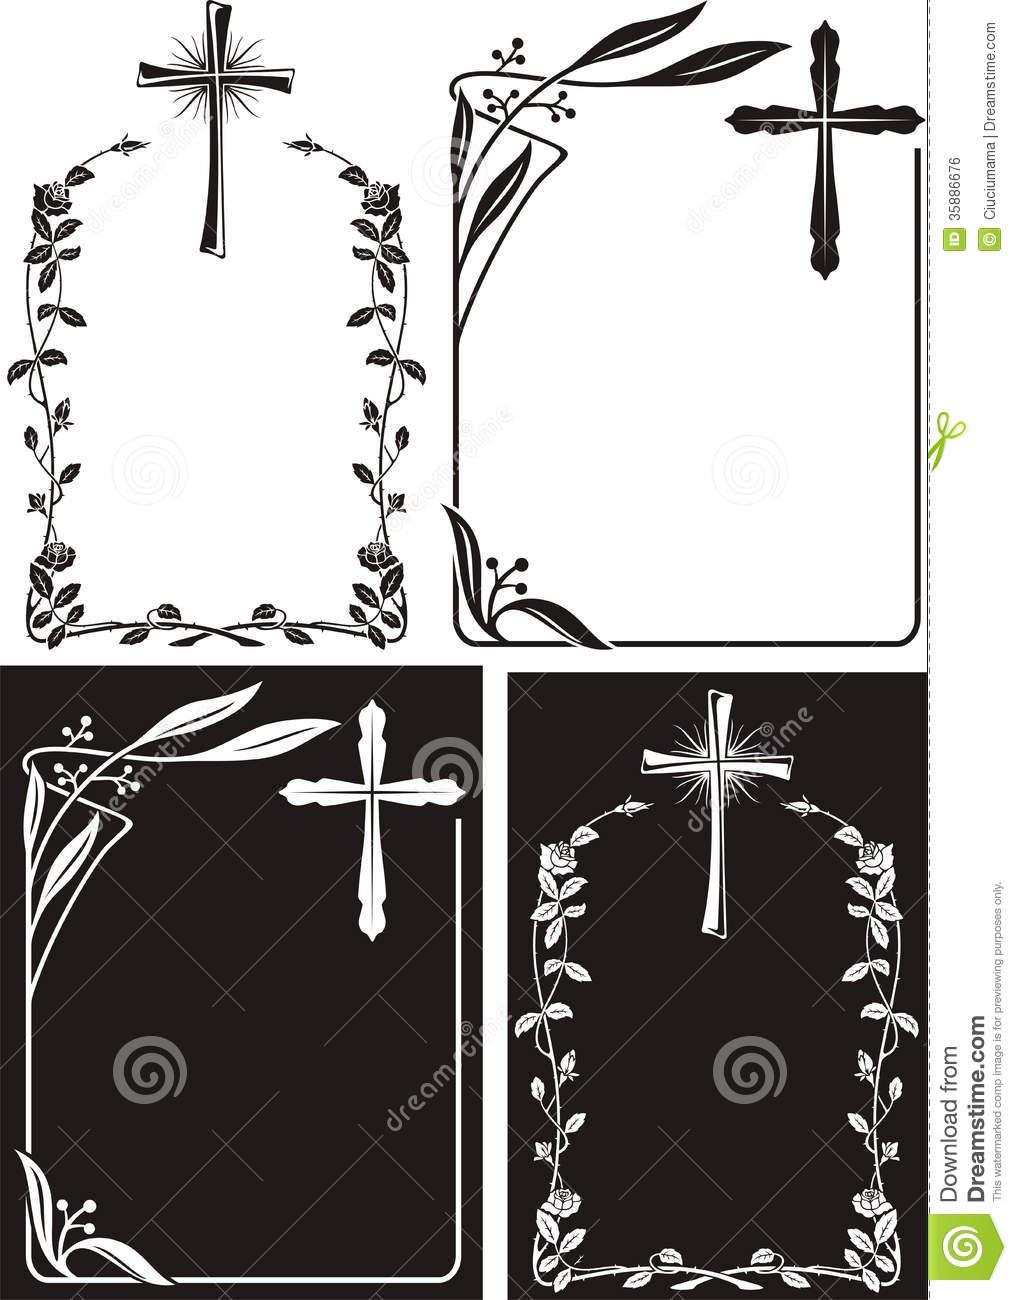 Obituary   Art Deco Frames With Cross Royalty Free Stock Image   Image